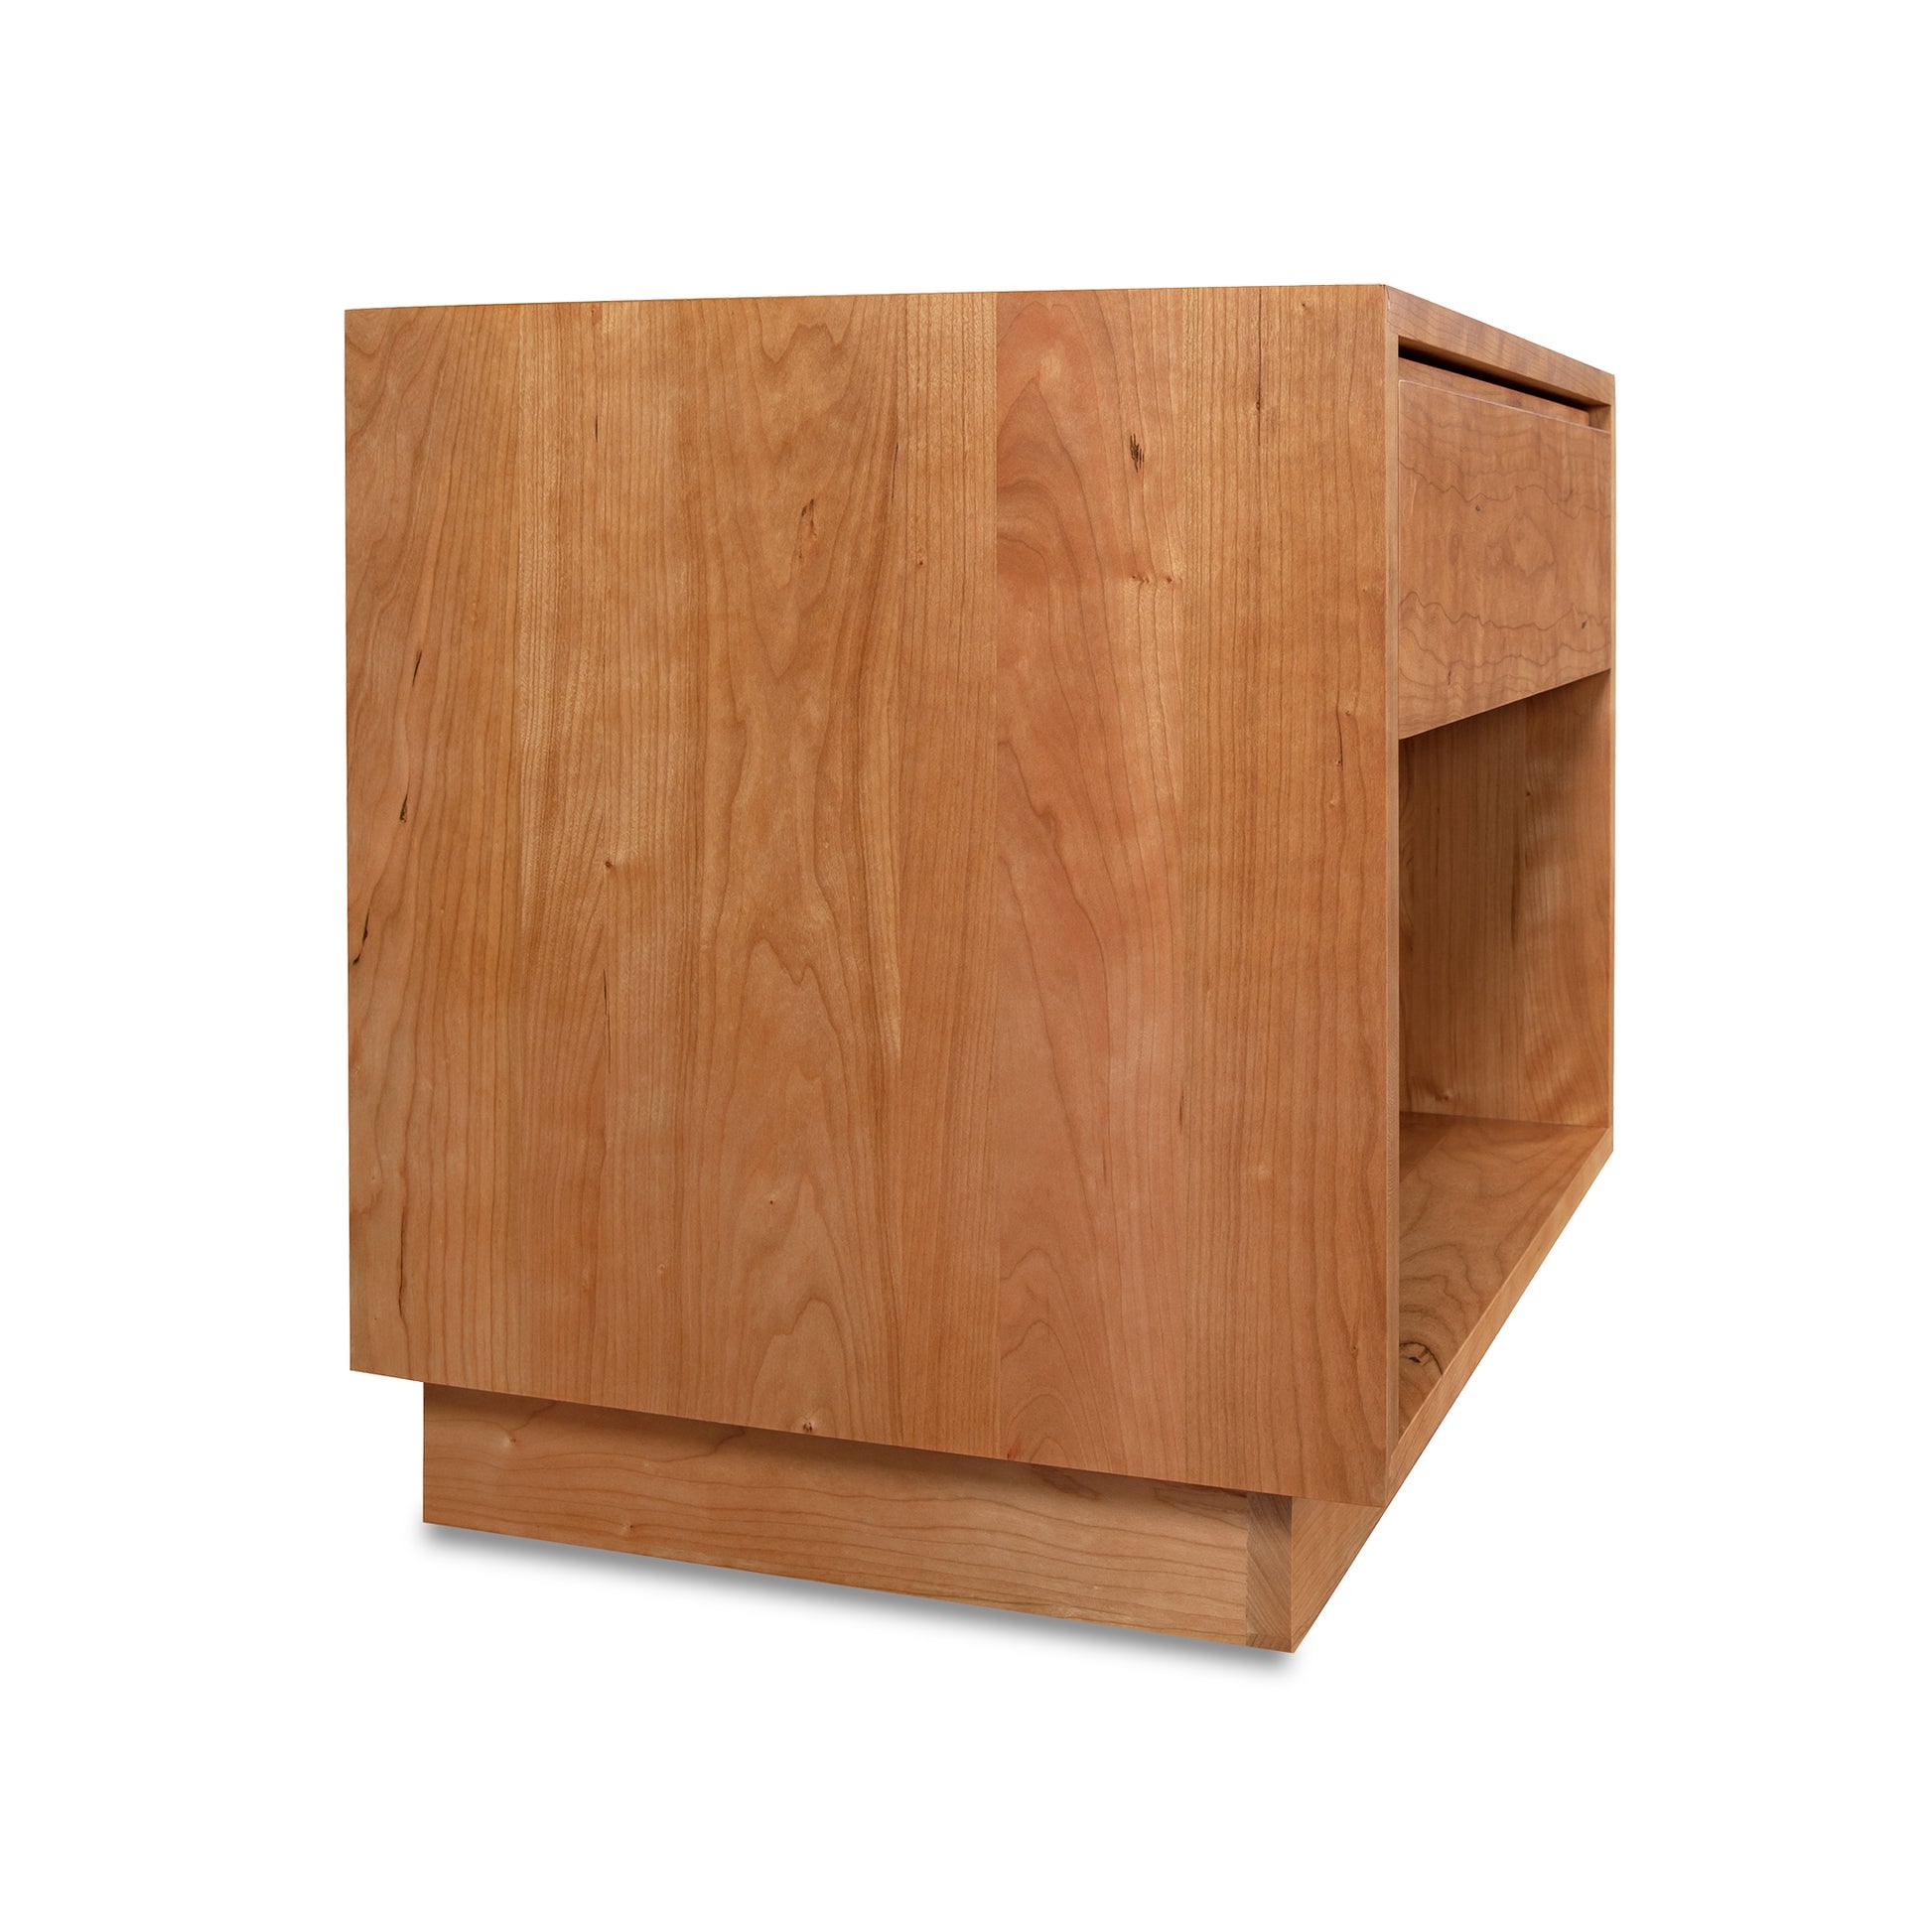 An image of a wooden nightstand with a drawer.